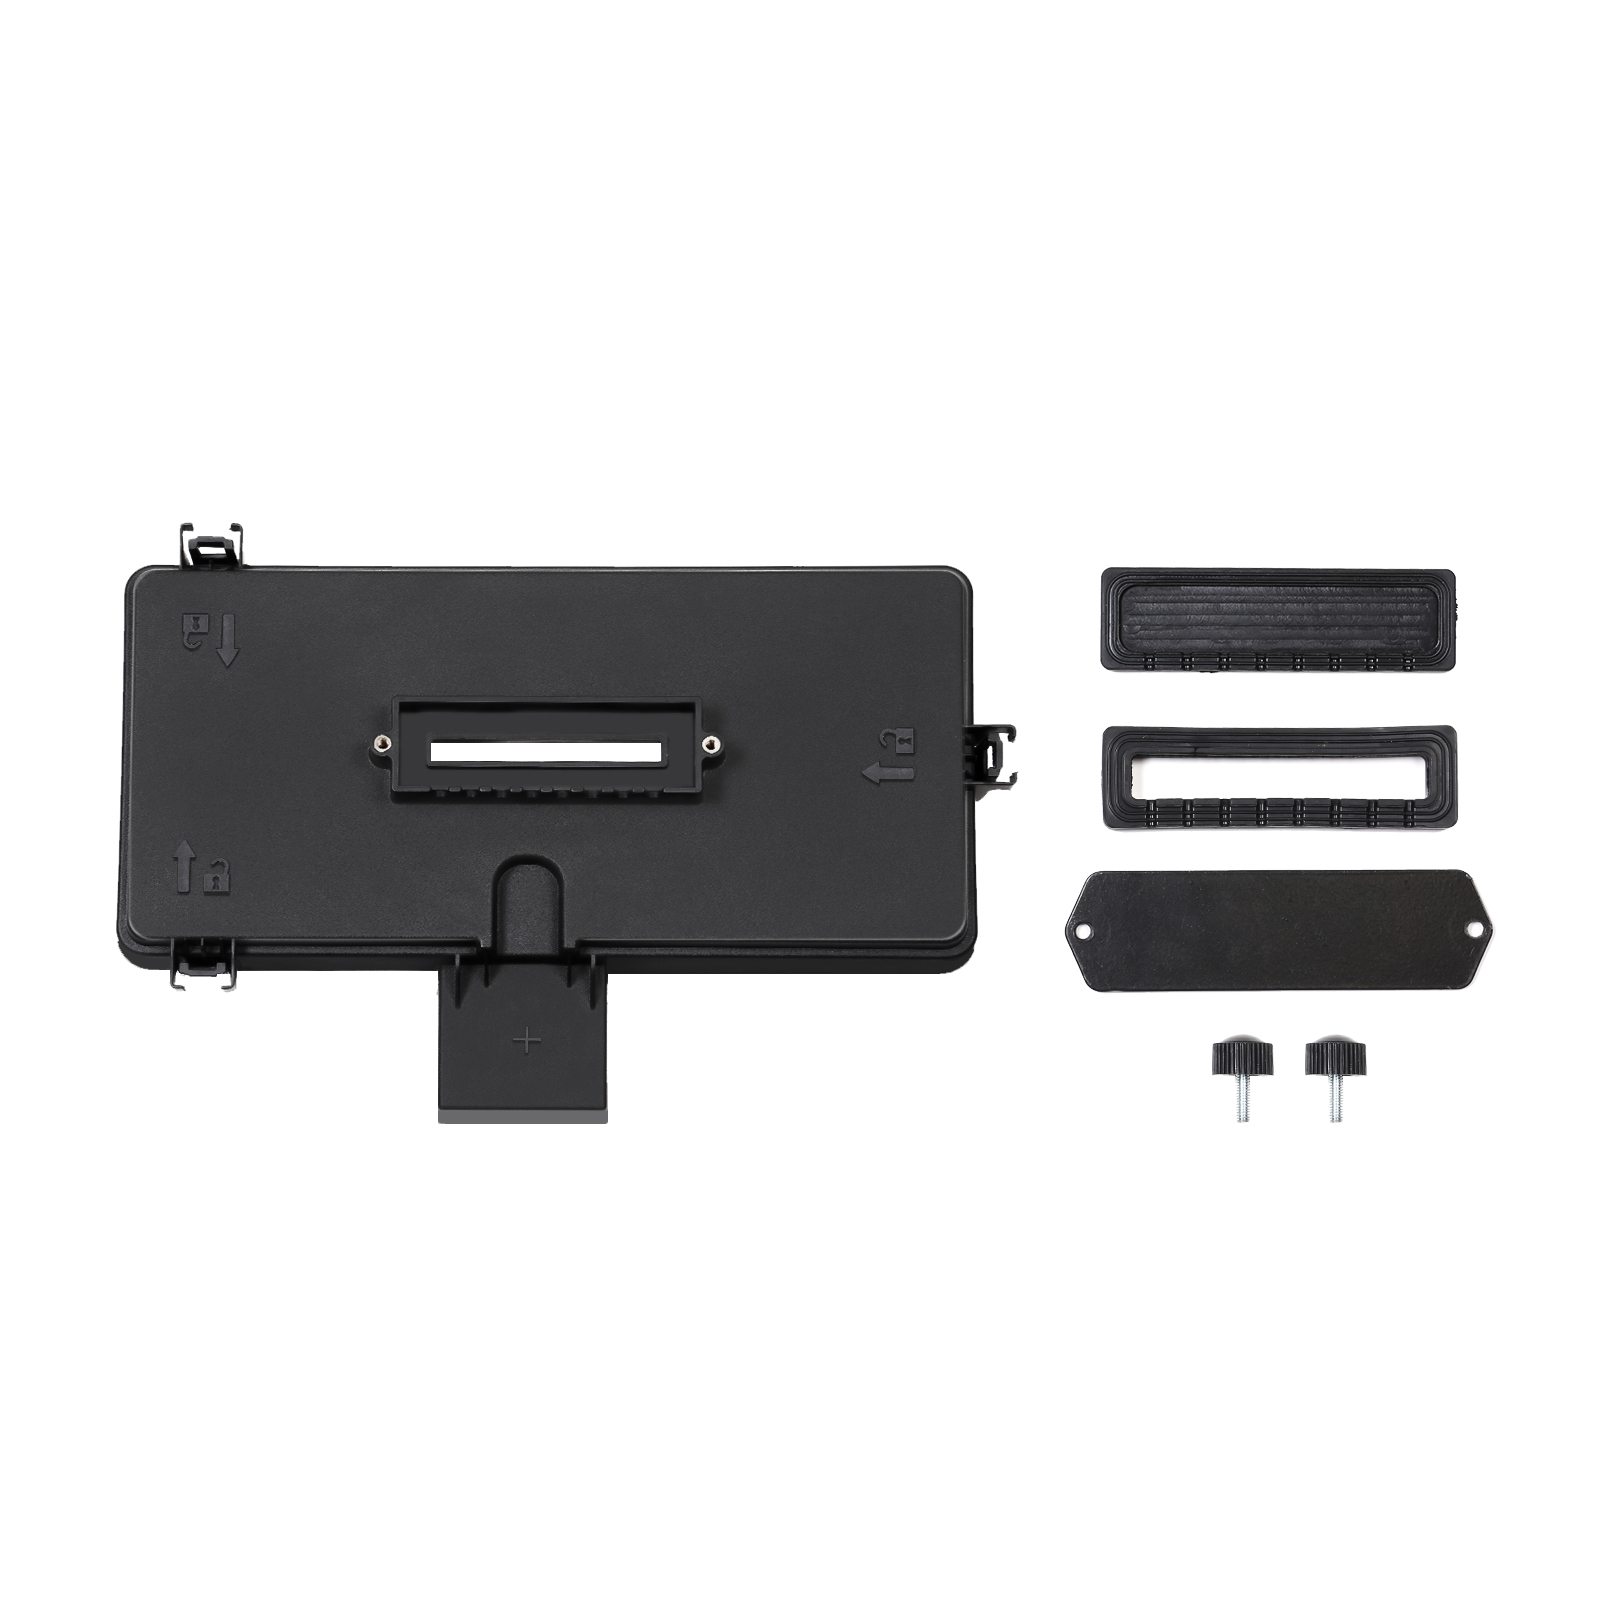 Ford Bronco Mabett Fuse Box Cover for Ford Bronco 2021 2022 2023 Available Now! 5274257